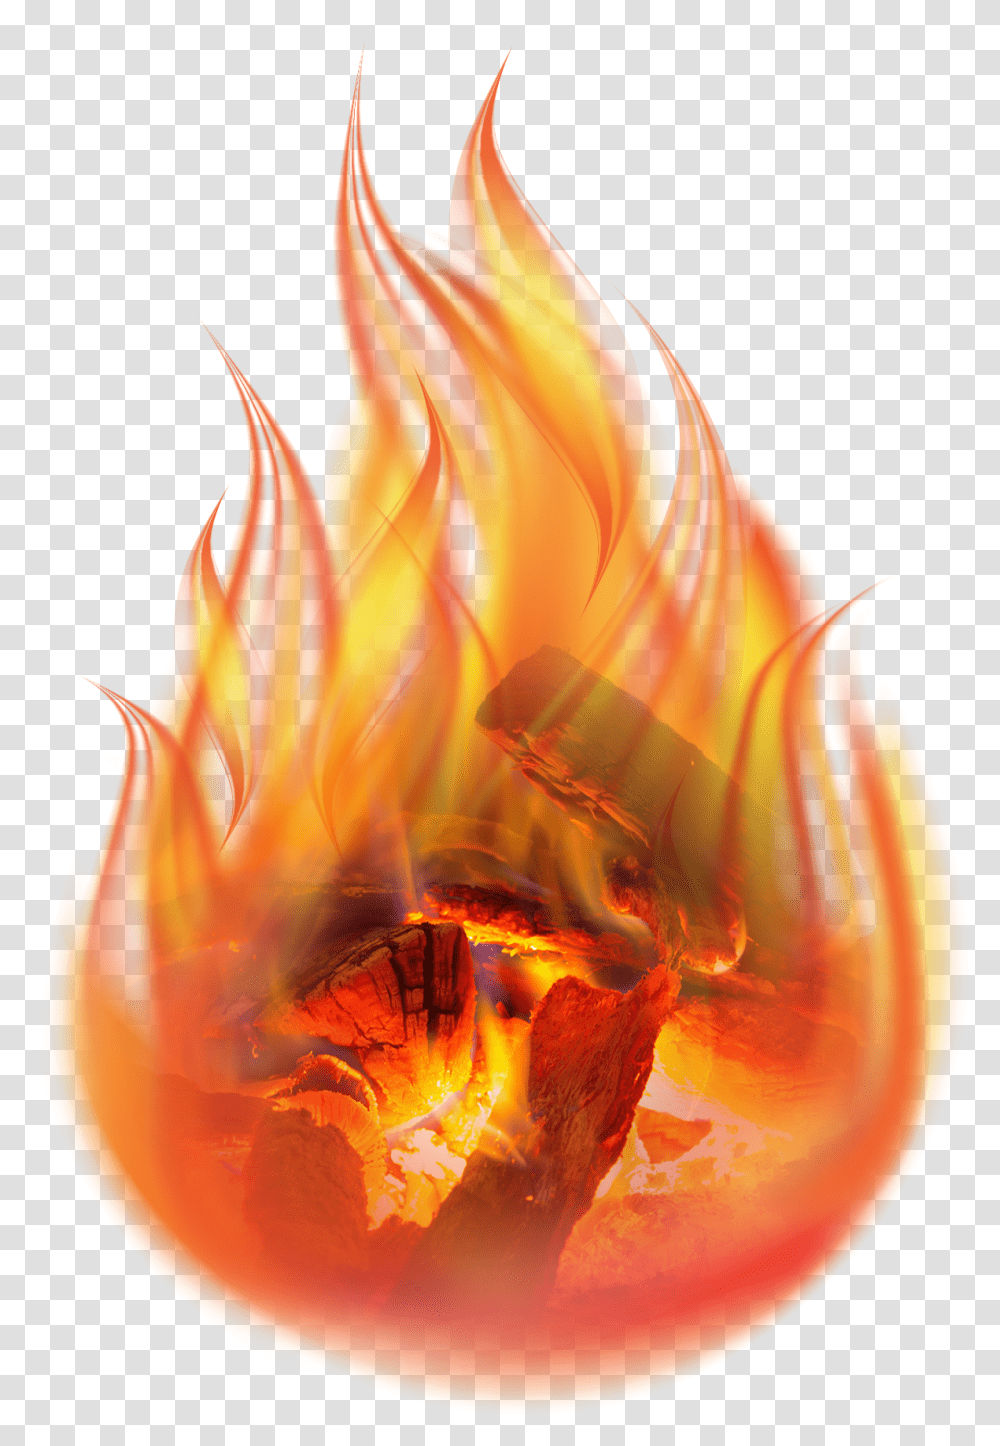 Cool Fire Download Fire In Air, Flame, Bonfire Transparent Png